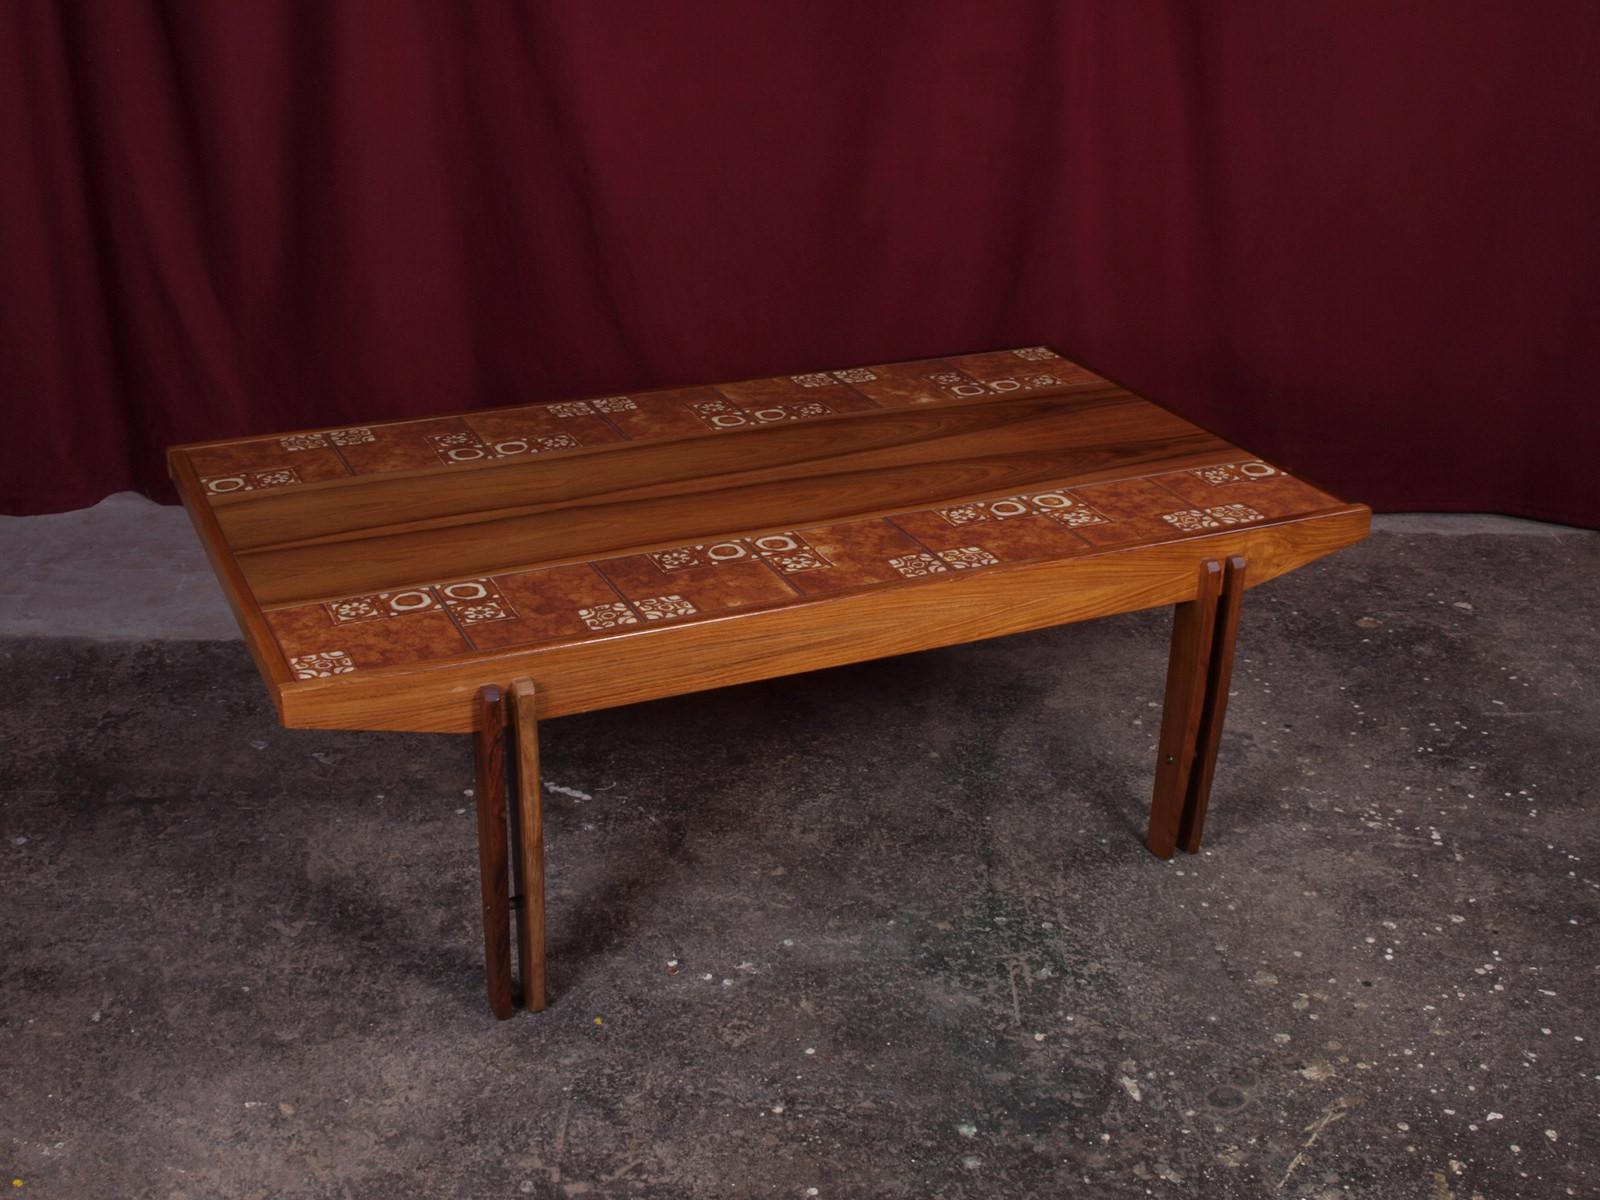 Vintage rosewood coffee table from unknown Danish designer and manufactor. Made in beautiful wood and tiles in the 1960s / 1970s Denmark.

Amazing conditon despite the age of this item. Only 1 owner and kept very carefully.

The size of the